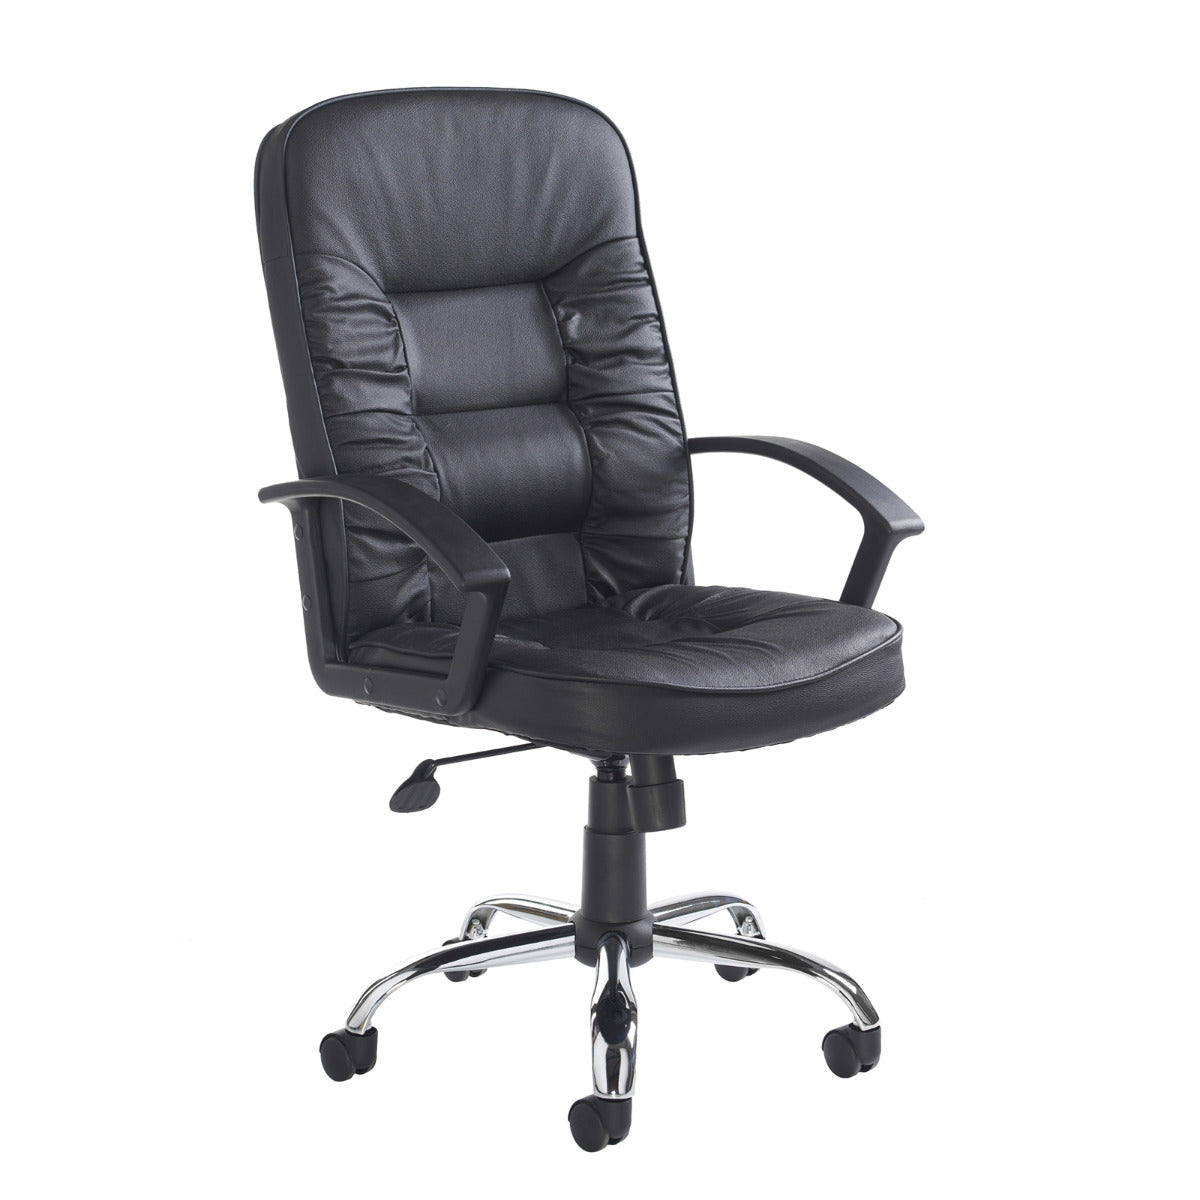 Hertford High Back Black Leather Faced Managers Office Chair Huddersfield